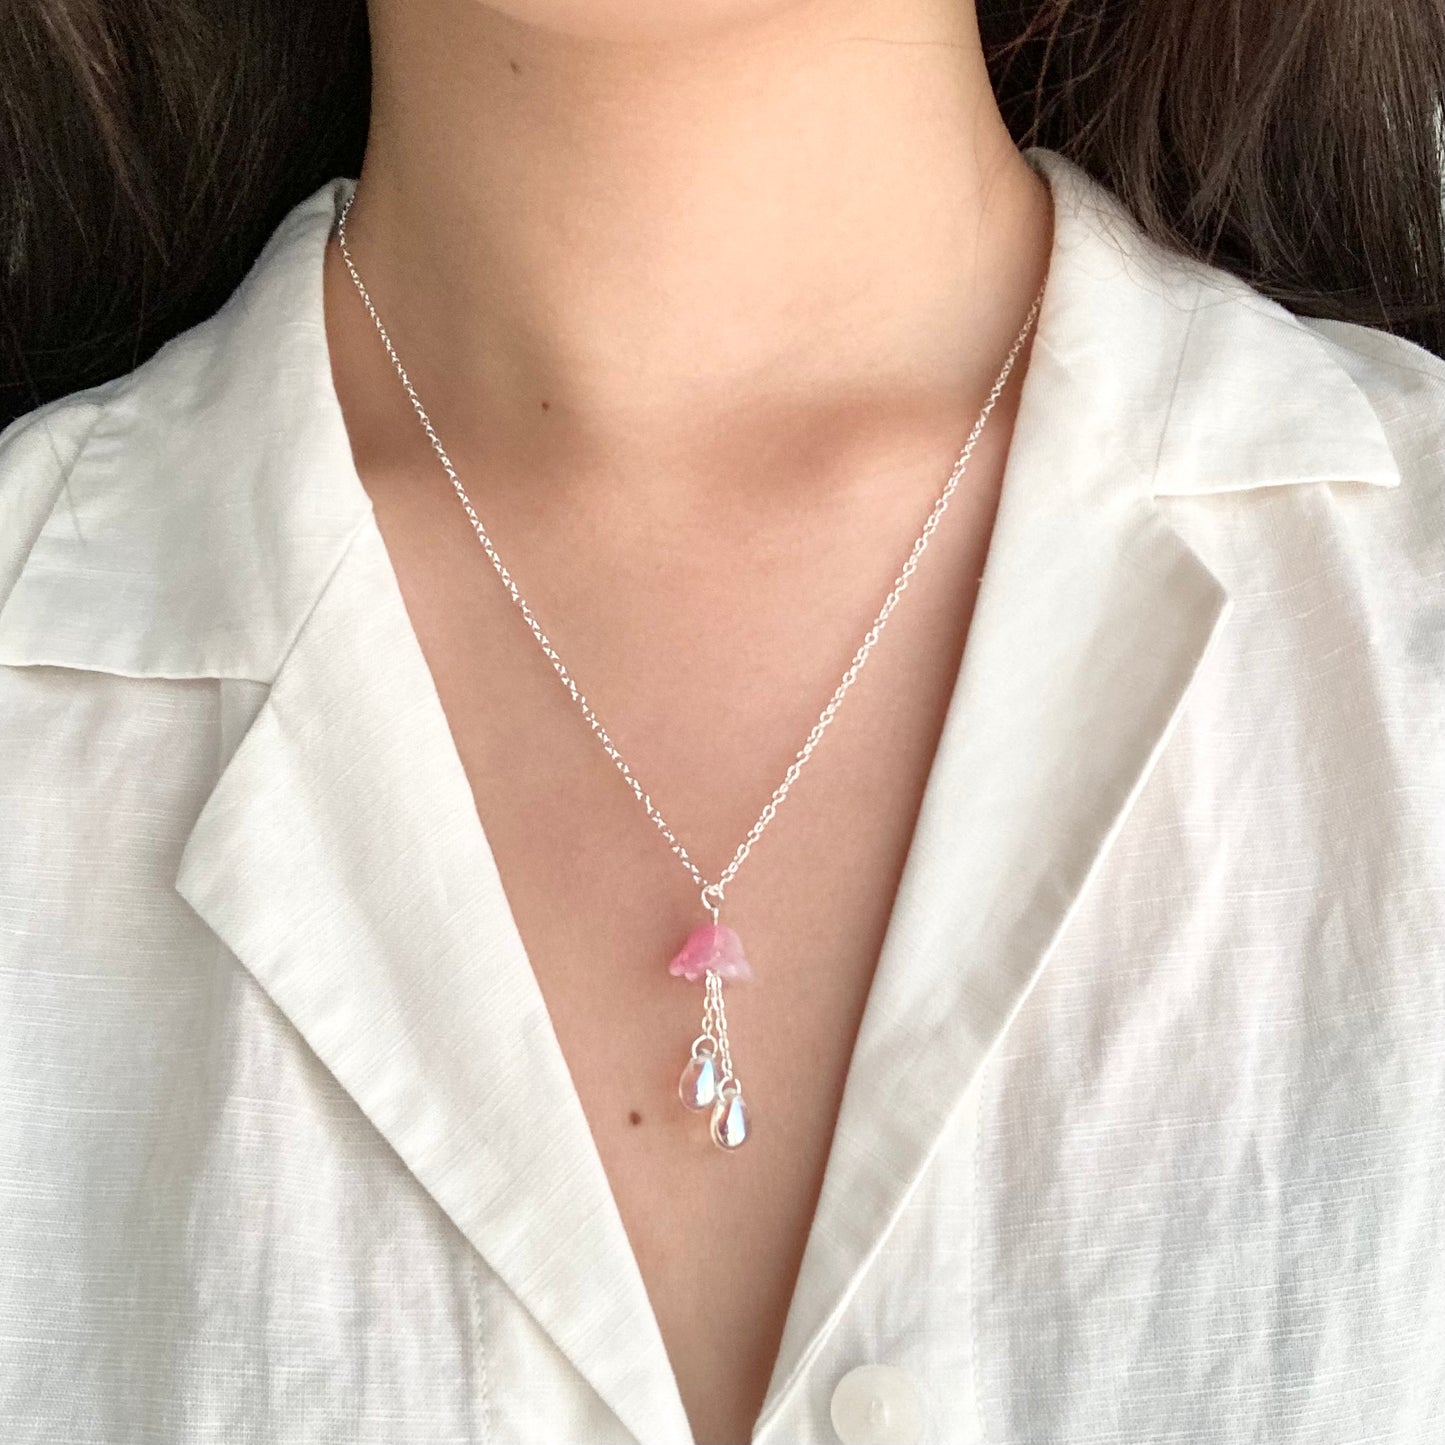 jellyfish necklaces